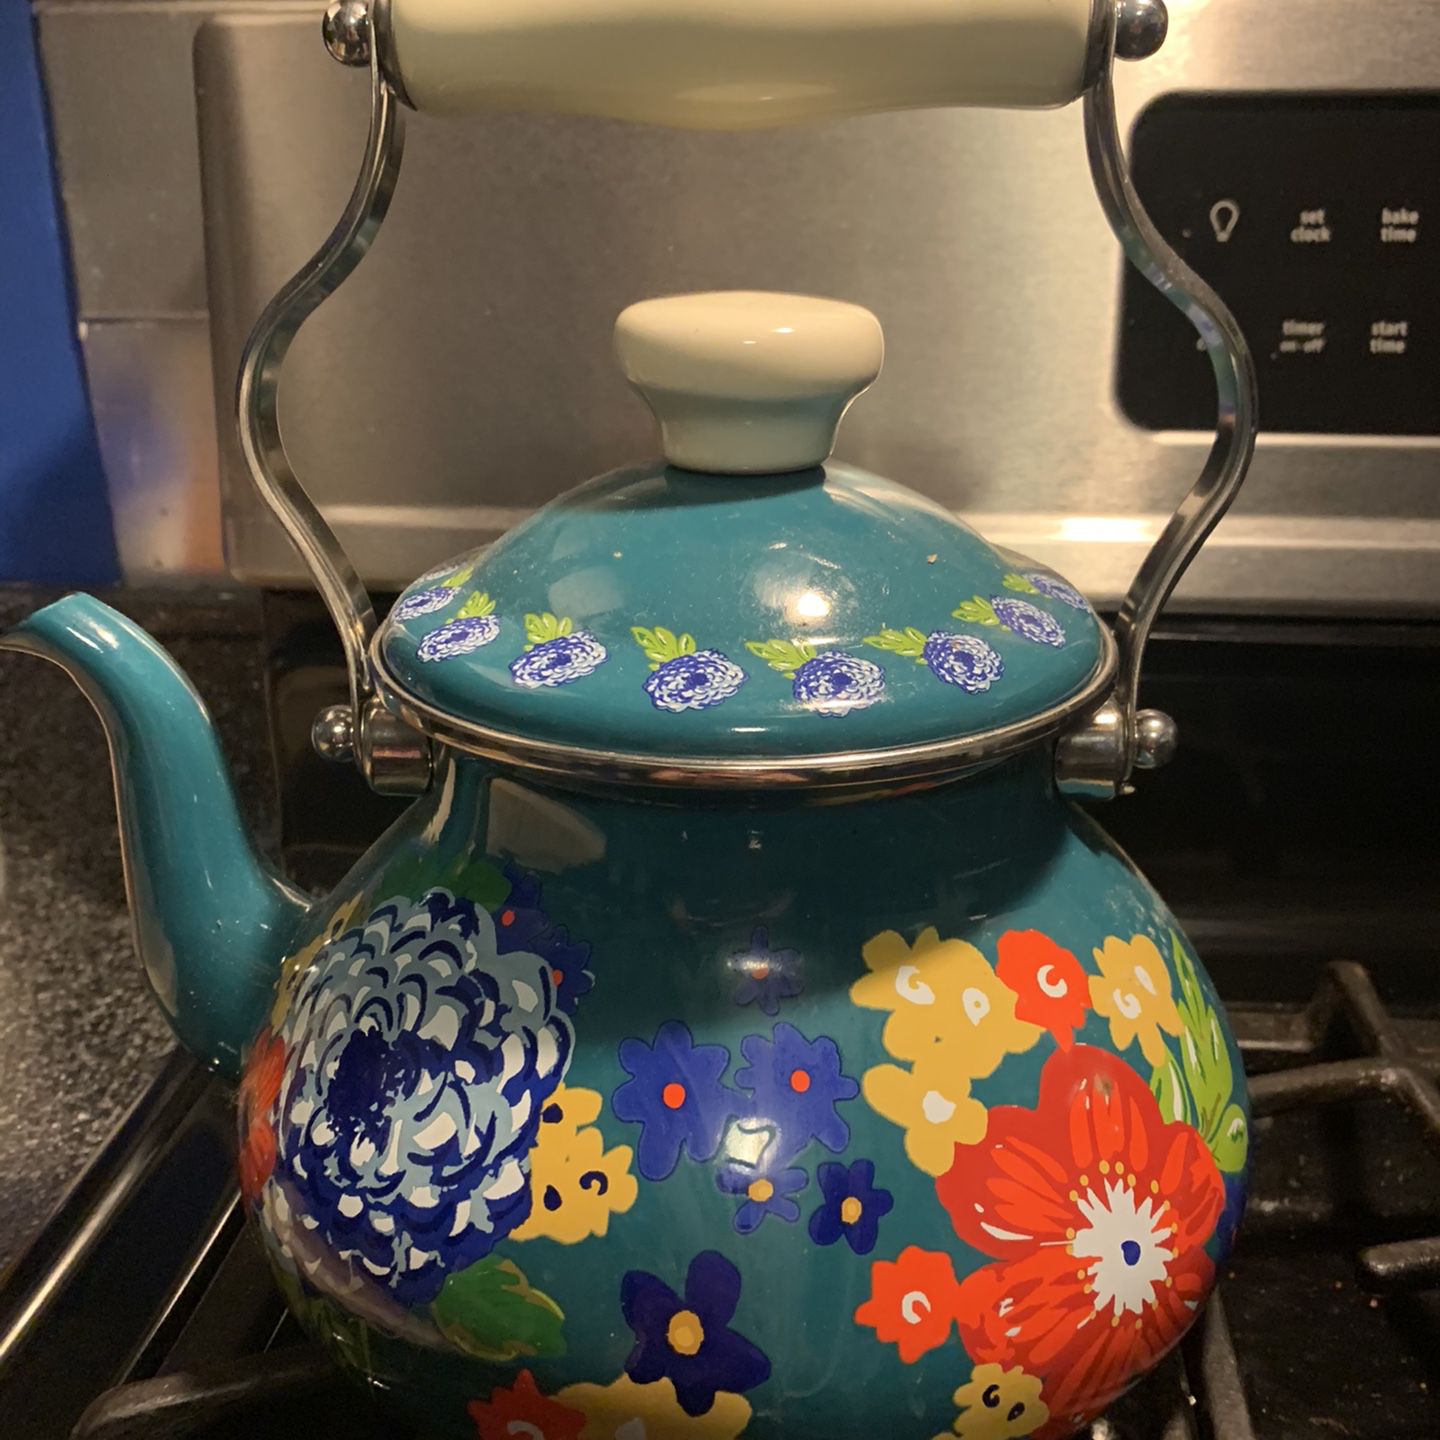 Brand new SMEG Electric Tea kettle for Sale in Garden City South, NY -  OfferUp